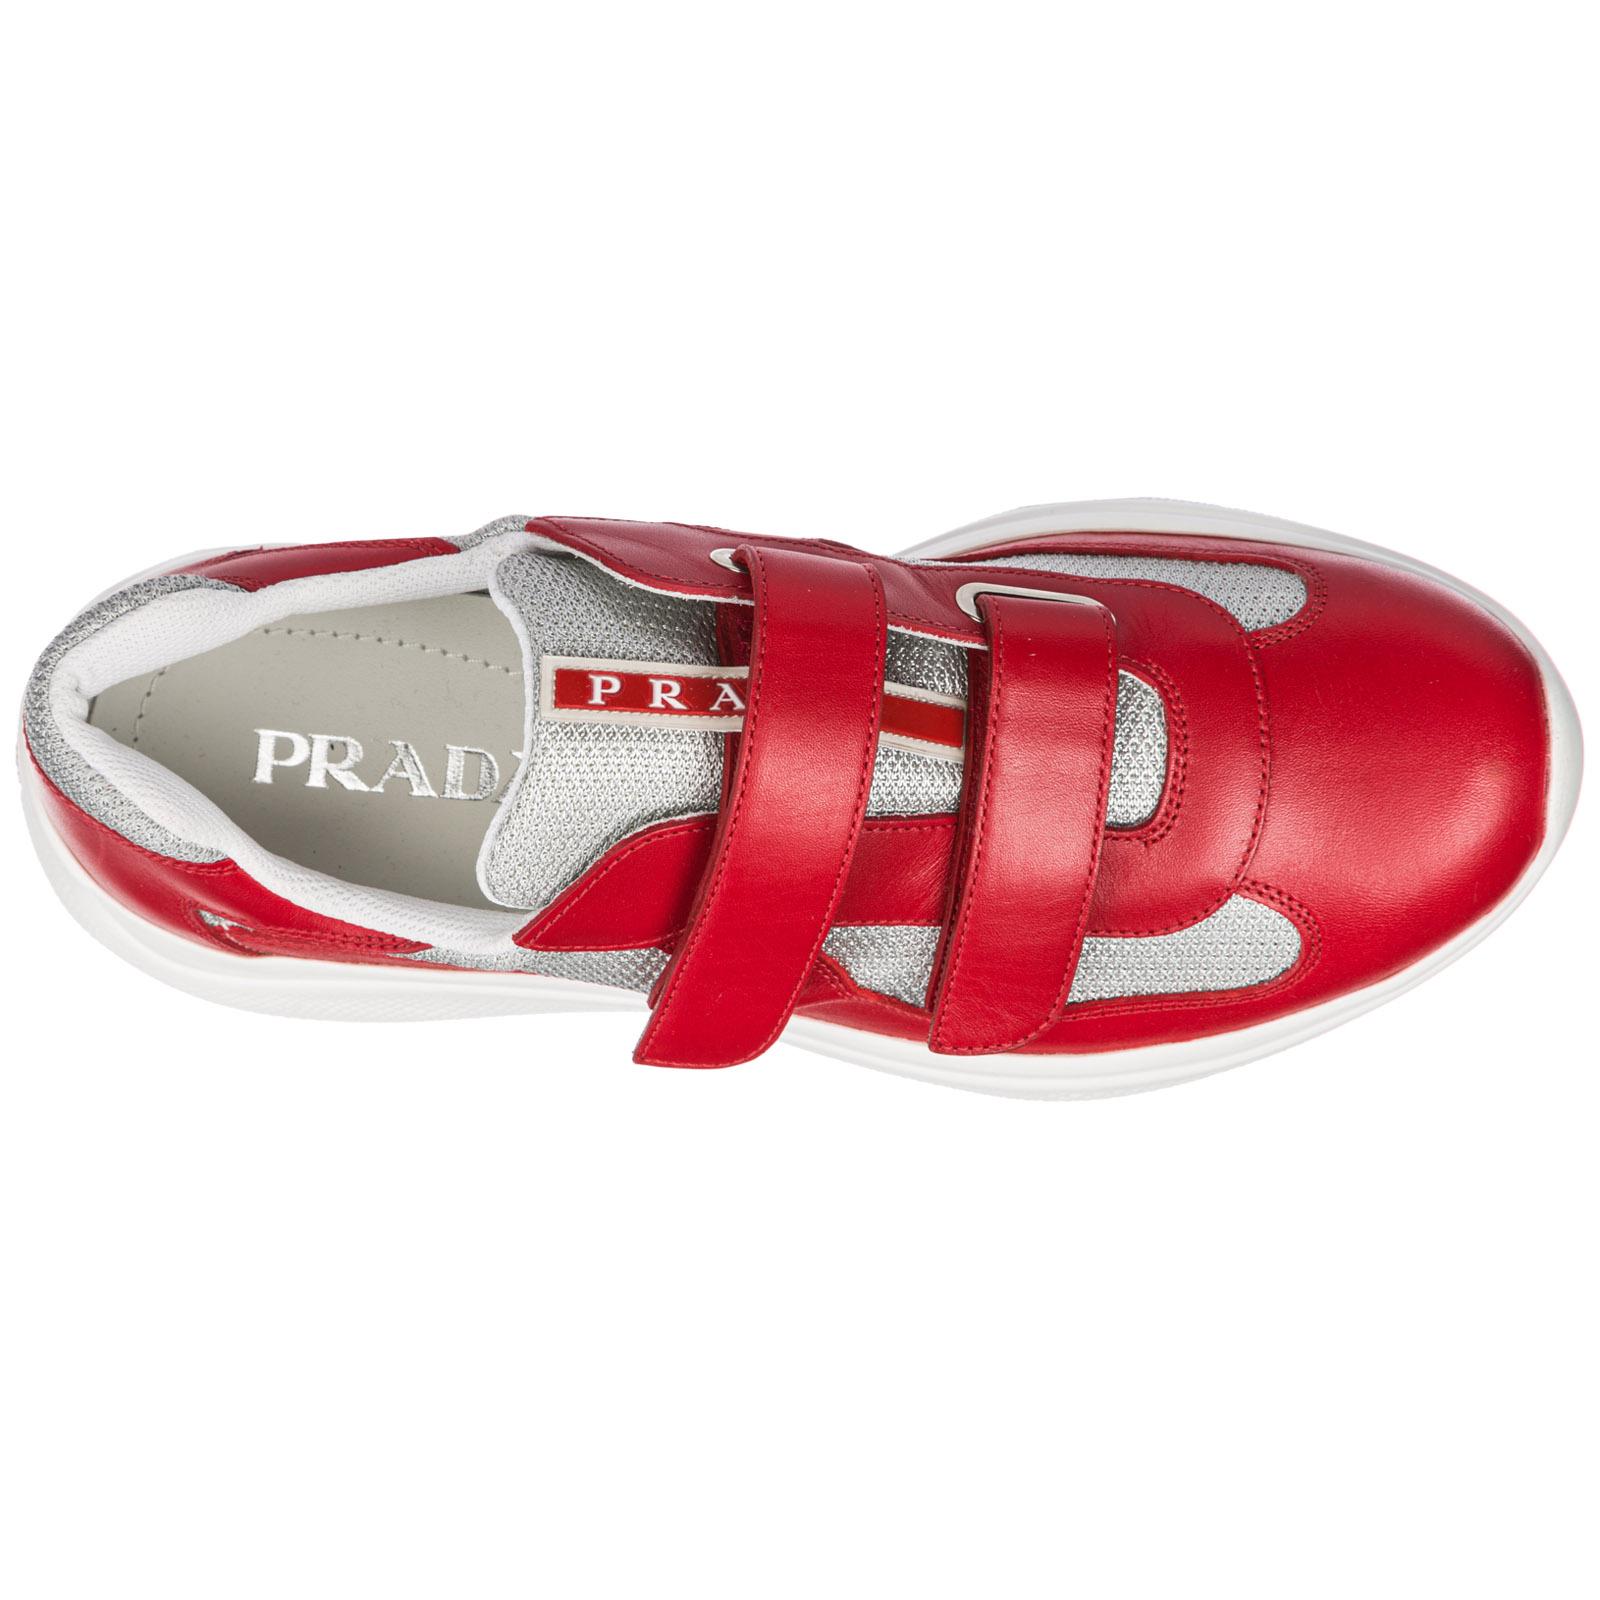 Prada Men's Shoes Leather Trainers in Red/Silver (Red) for - - Lyst